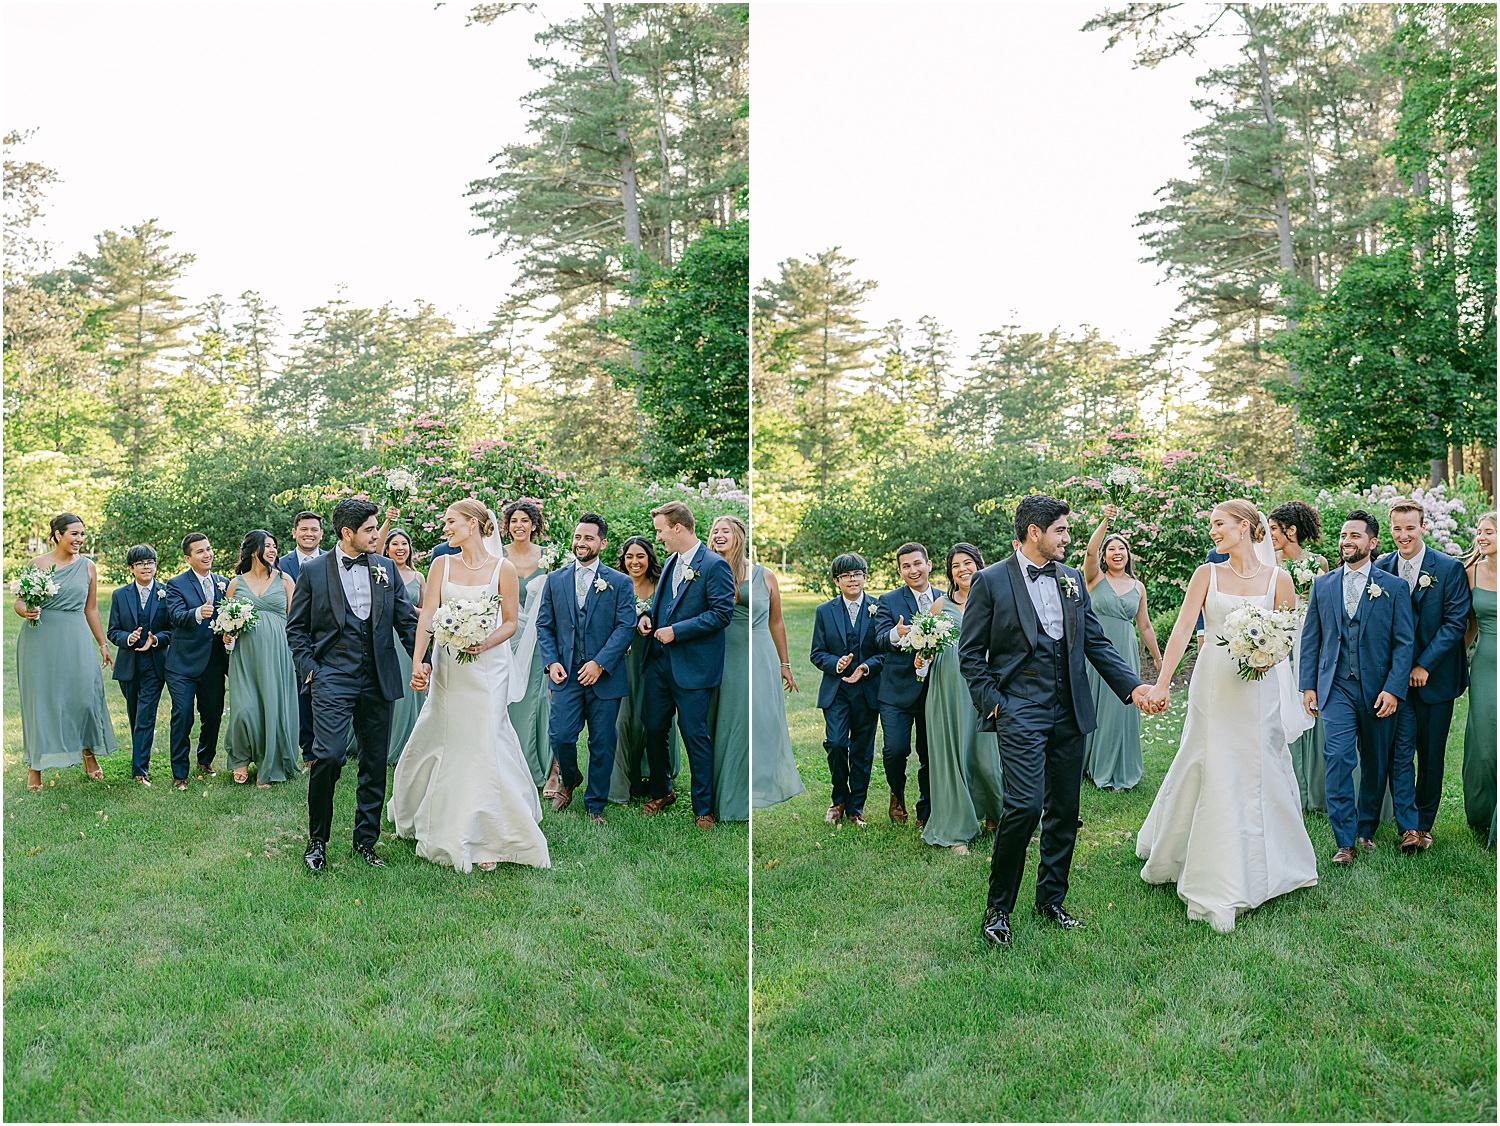 Bride and groom walks together hand in hand for Rachel Campbell Photography